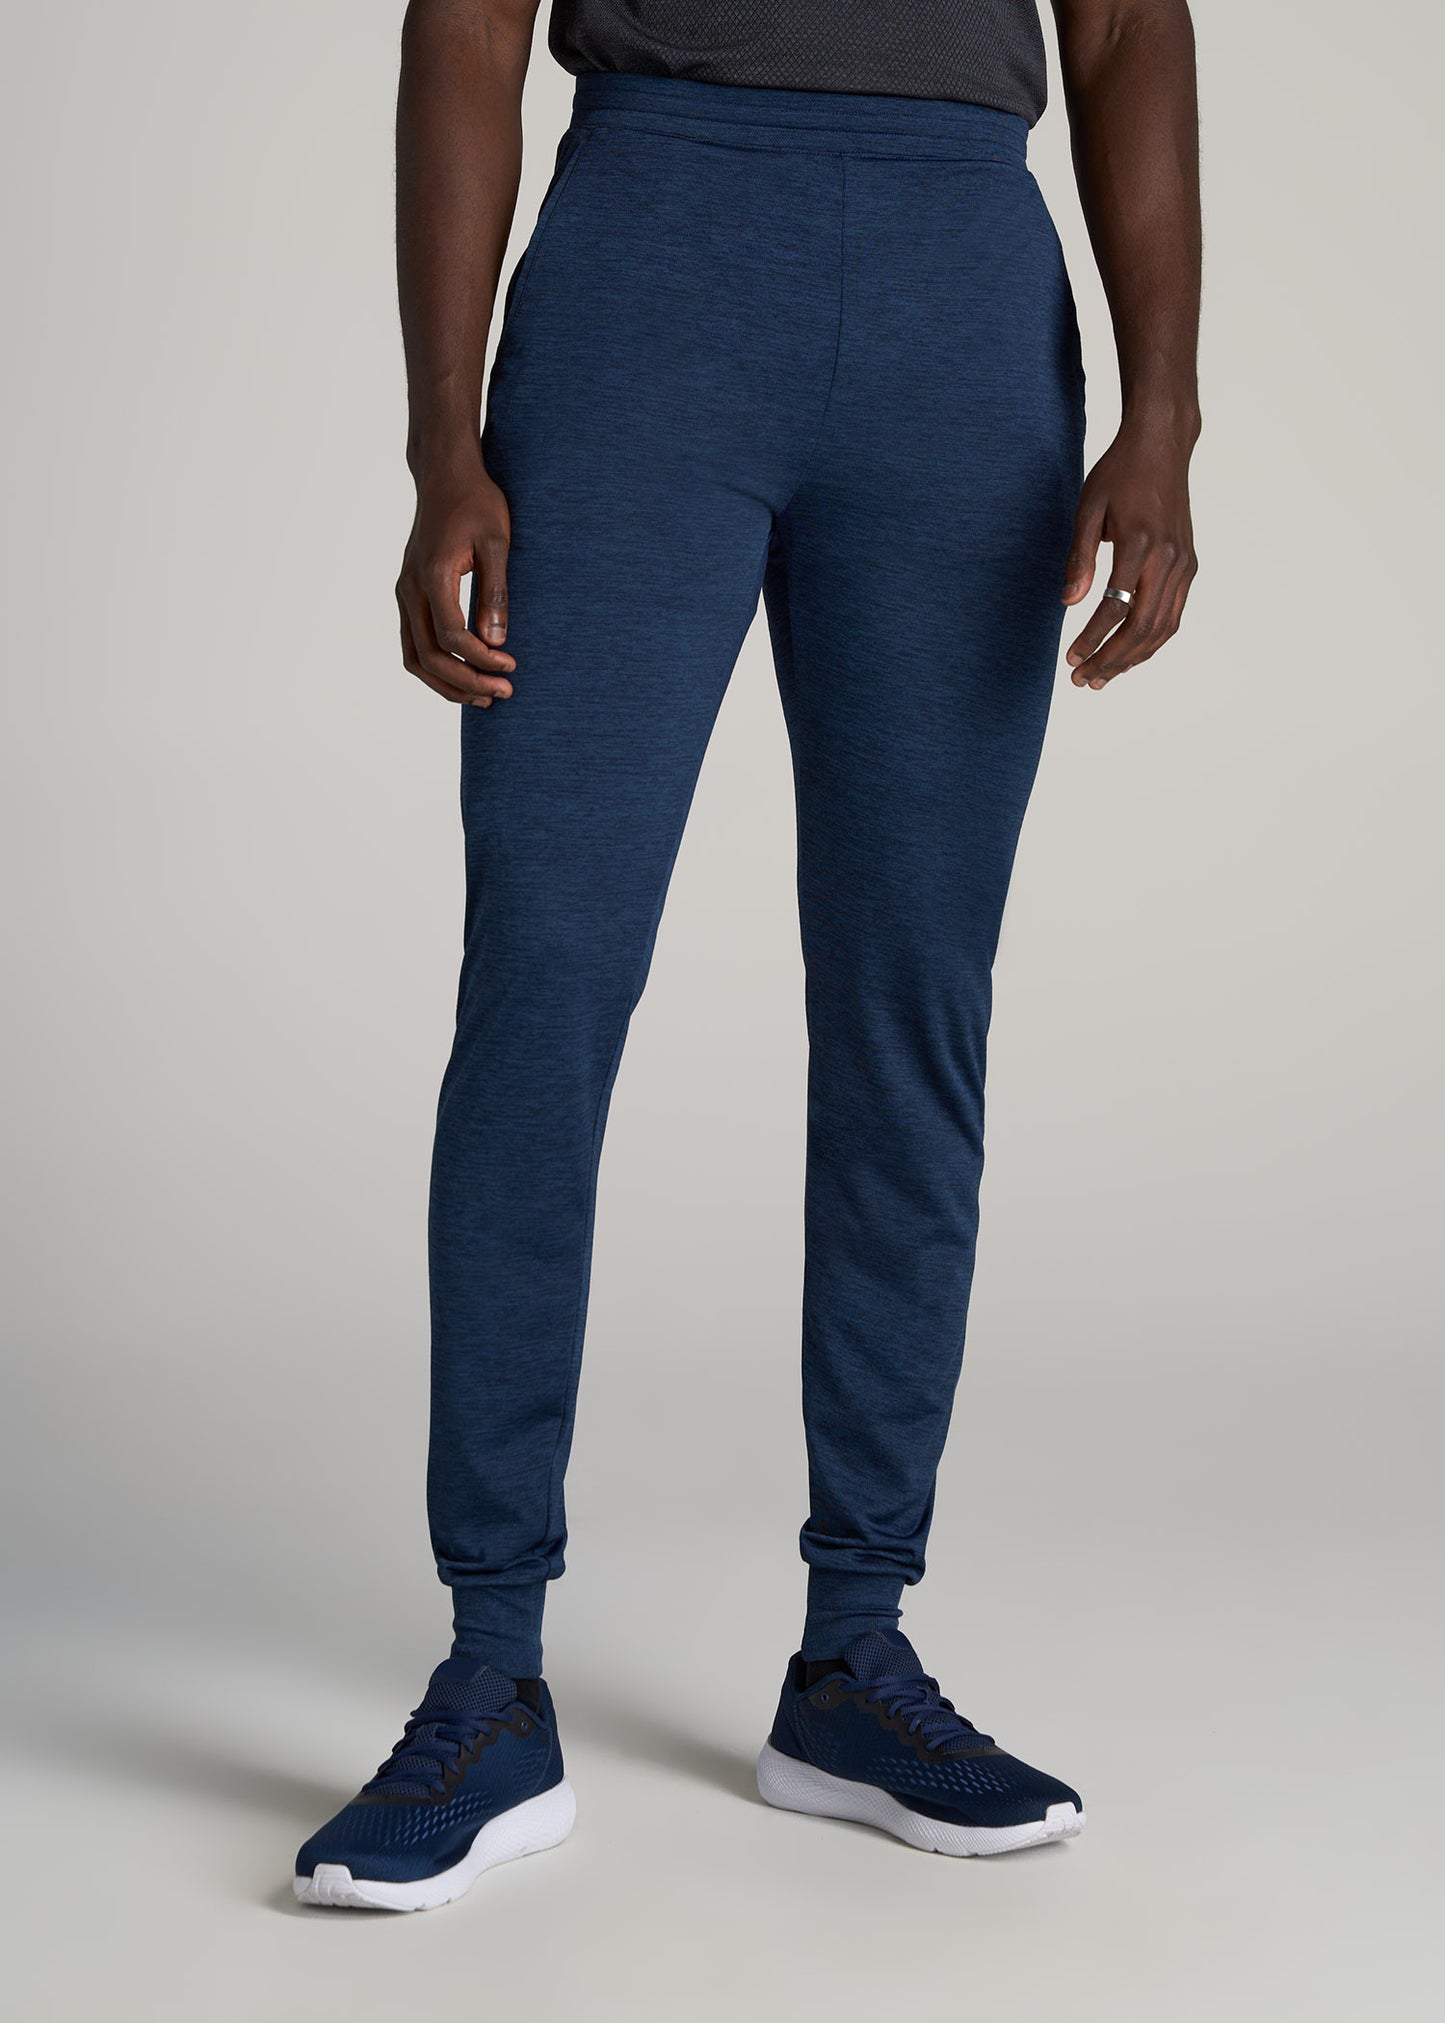       American-Tall-Men-AT-Performance-Engineered-Joggers-NavyMix-front